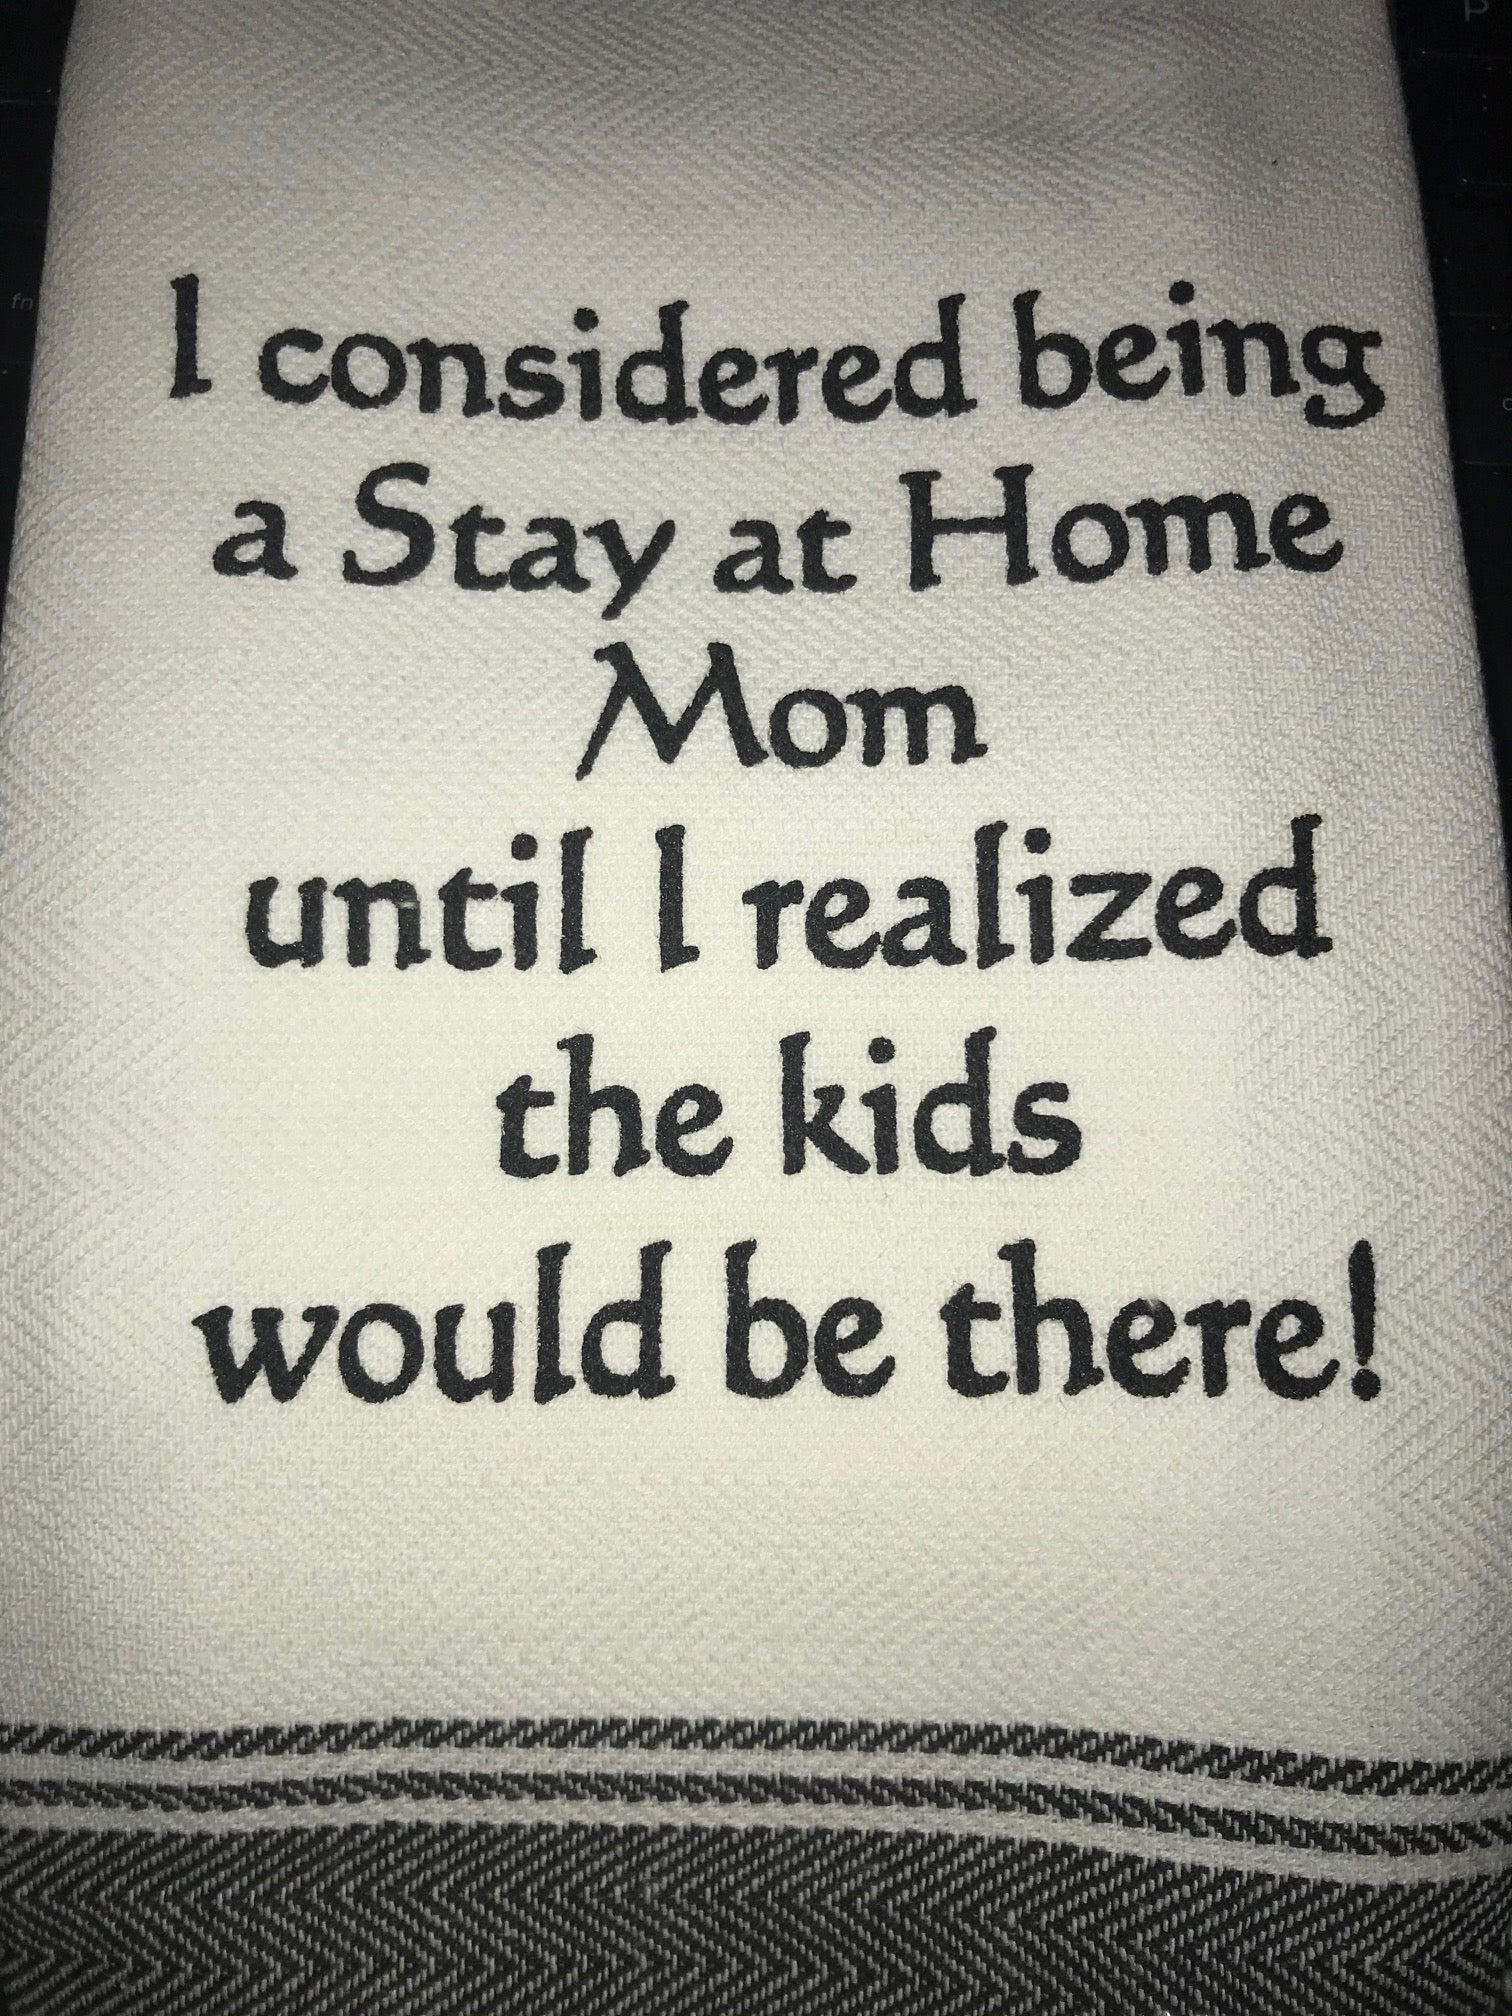 Stay at Home mom - Towel